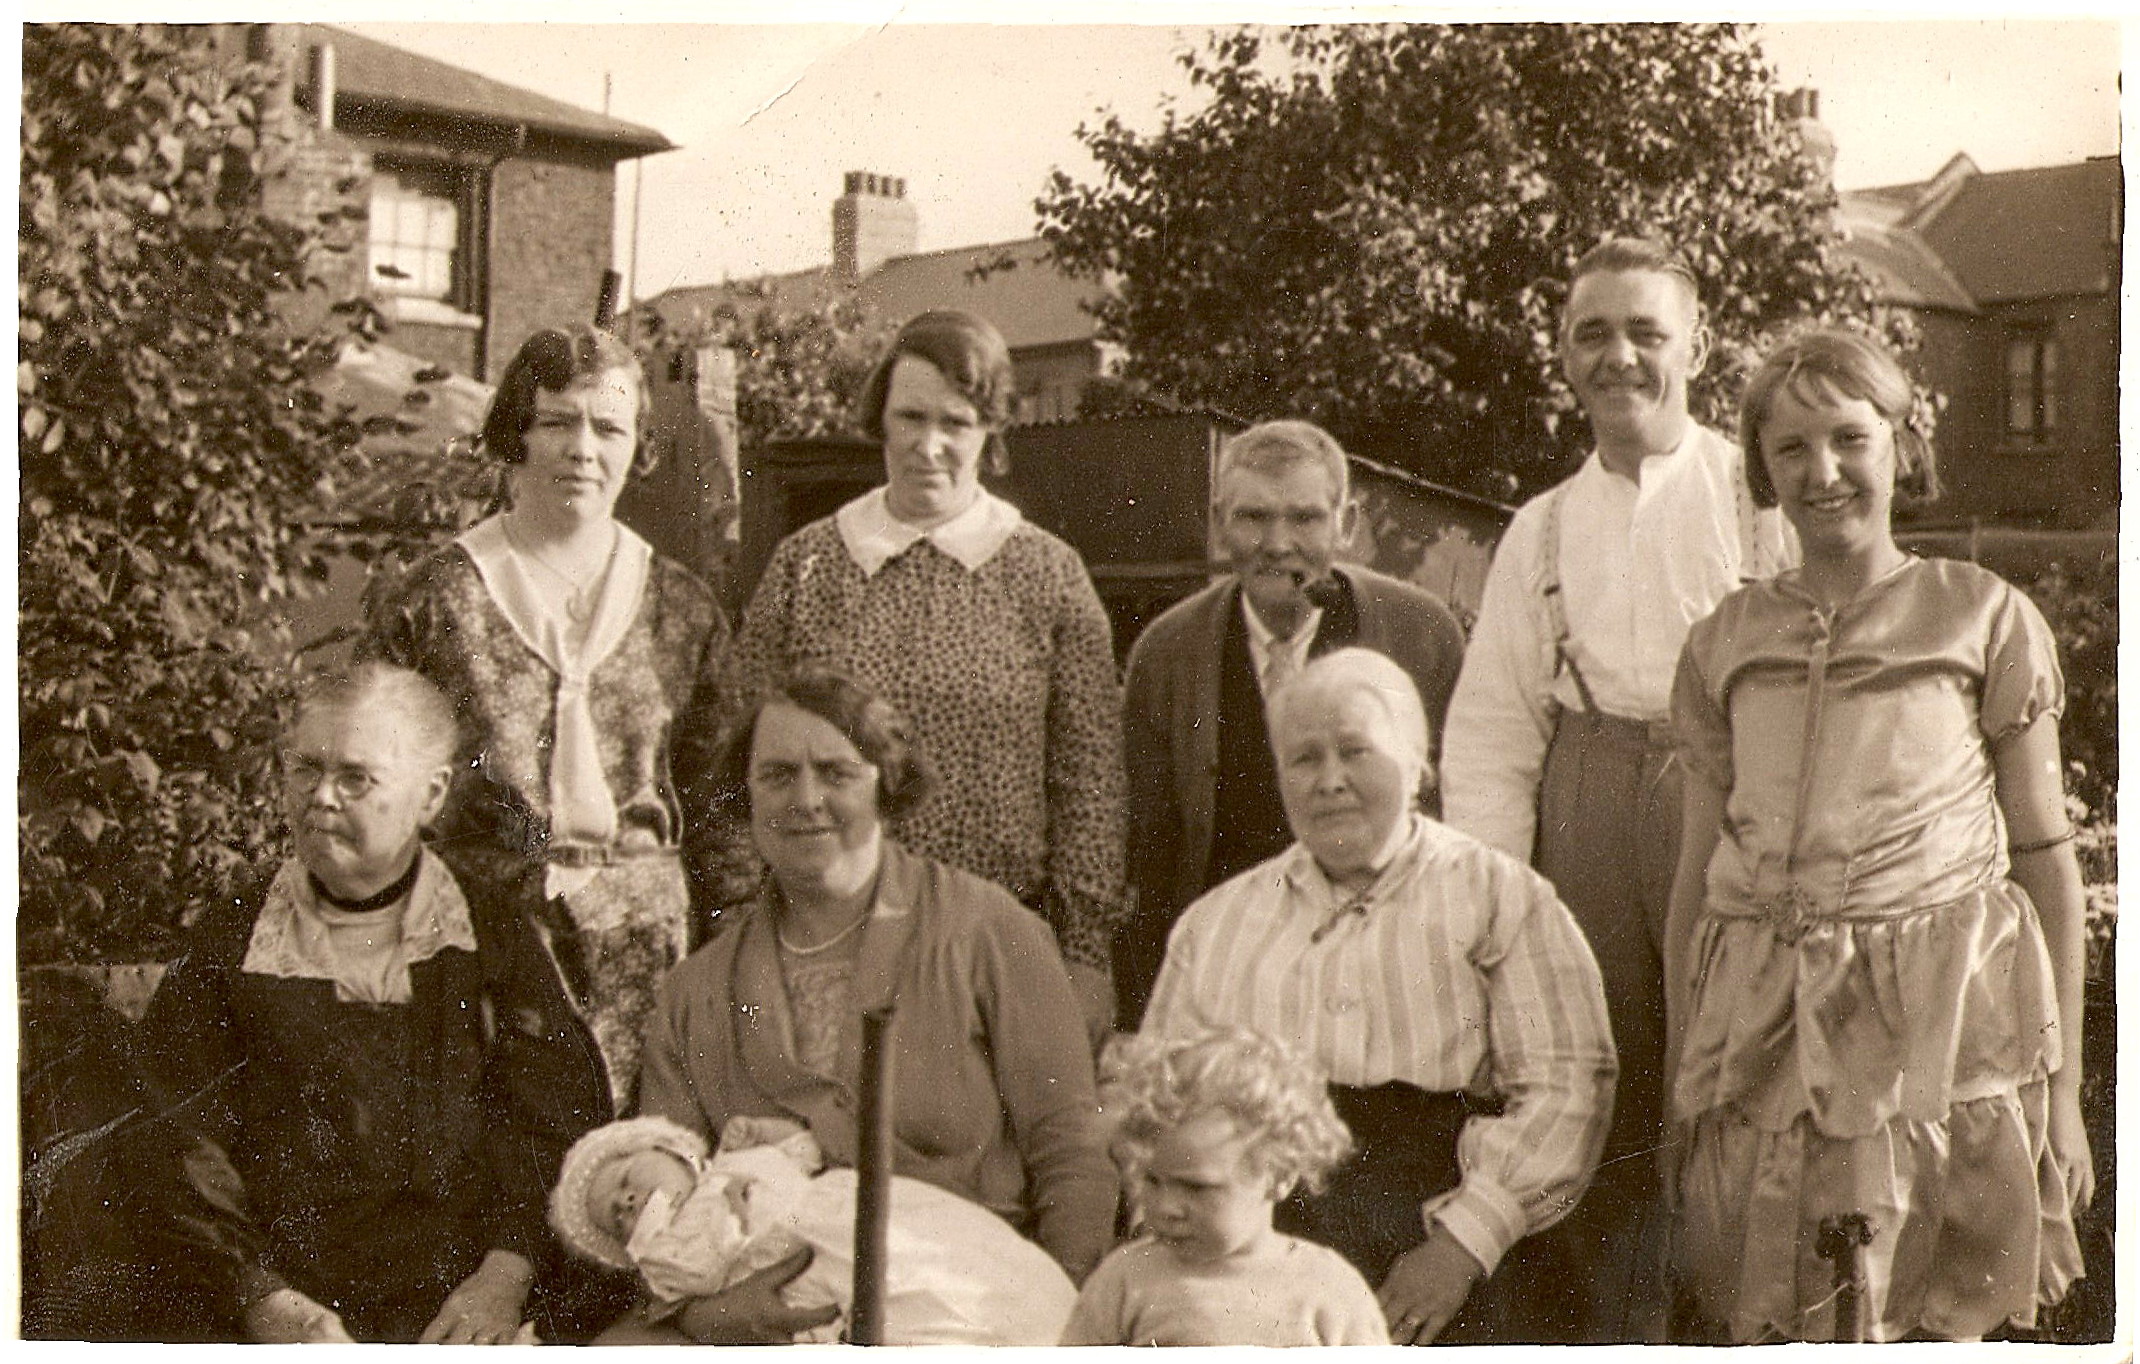 black and white photo\' of mixed group of men, women and children in 1920s clothing in a garden, ranging from an infant to very old, with in the front row three seated women visible from the waist up plus a standing girl to the right, with two men and two women standing behind them: the middle one of the seated women is holding a baby and there is a toddler with a mass of blond curls standing in front of all